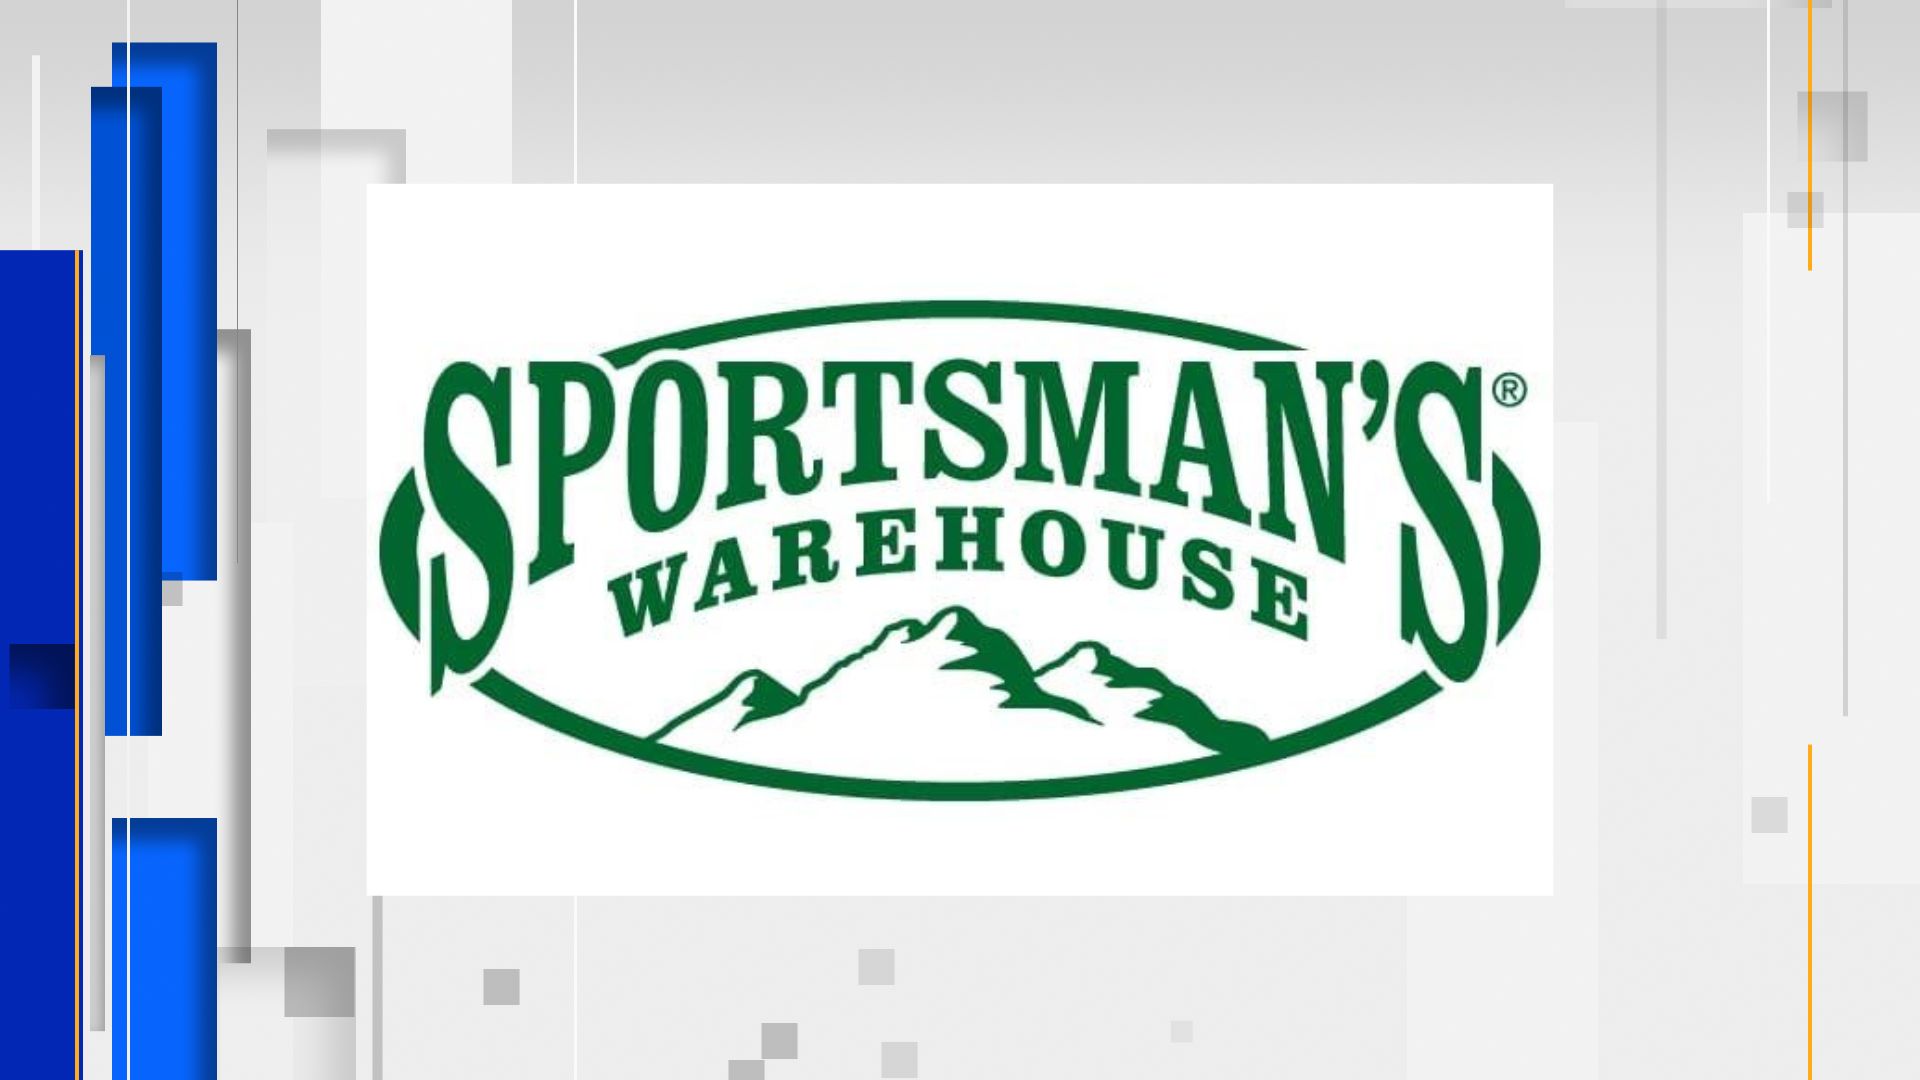 Come get your Winchester - Sportsman's Warehouse Kalamazoo